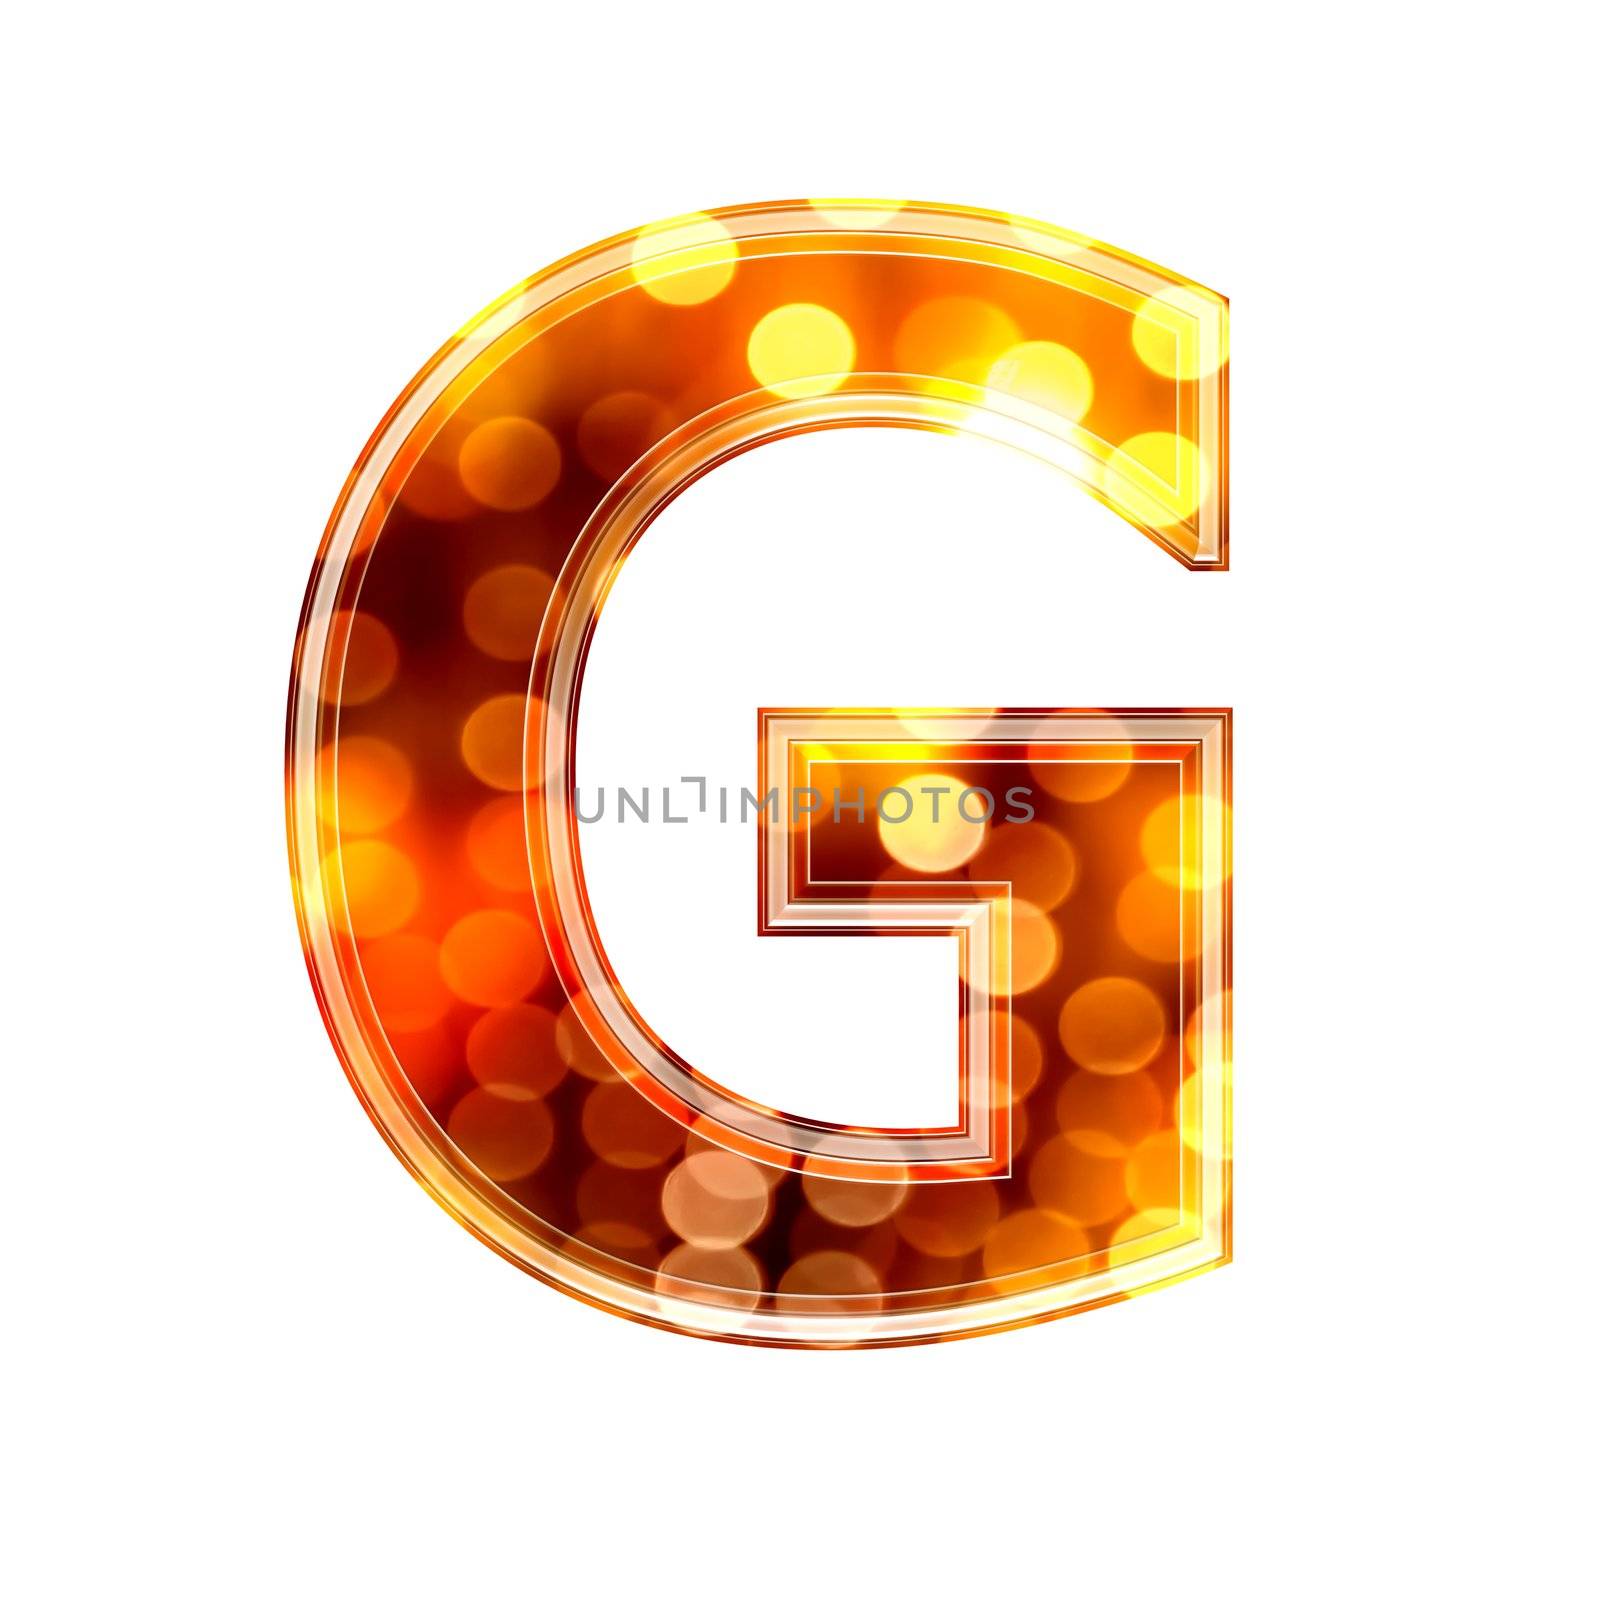 3d letter with glowing lights texture - G by chrisroll